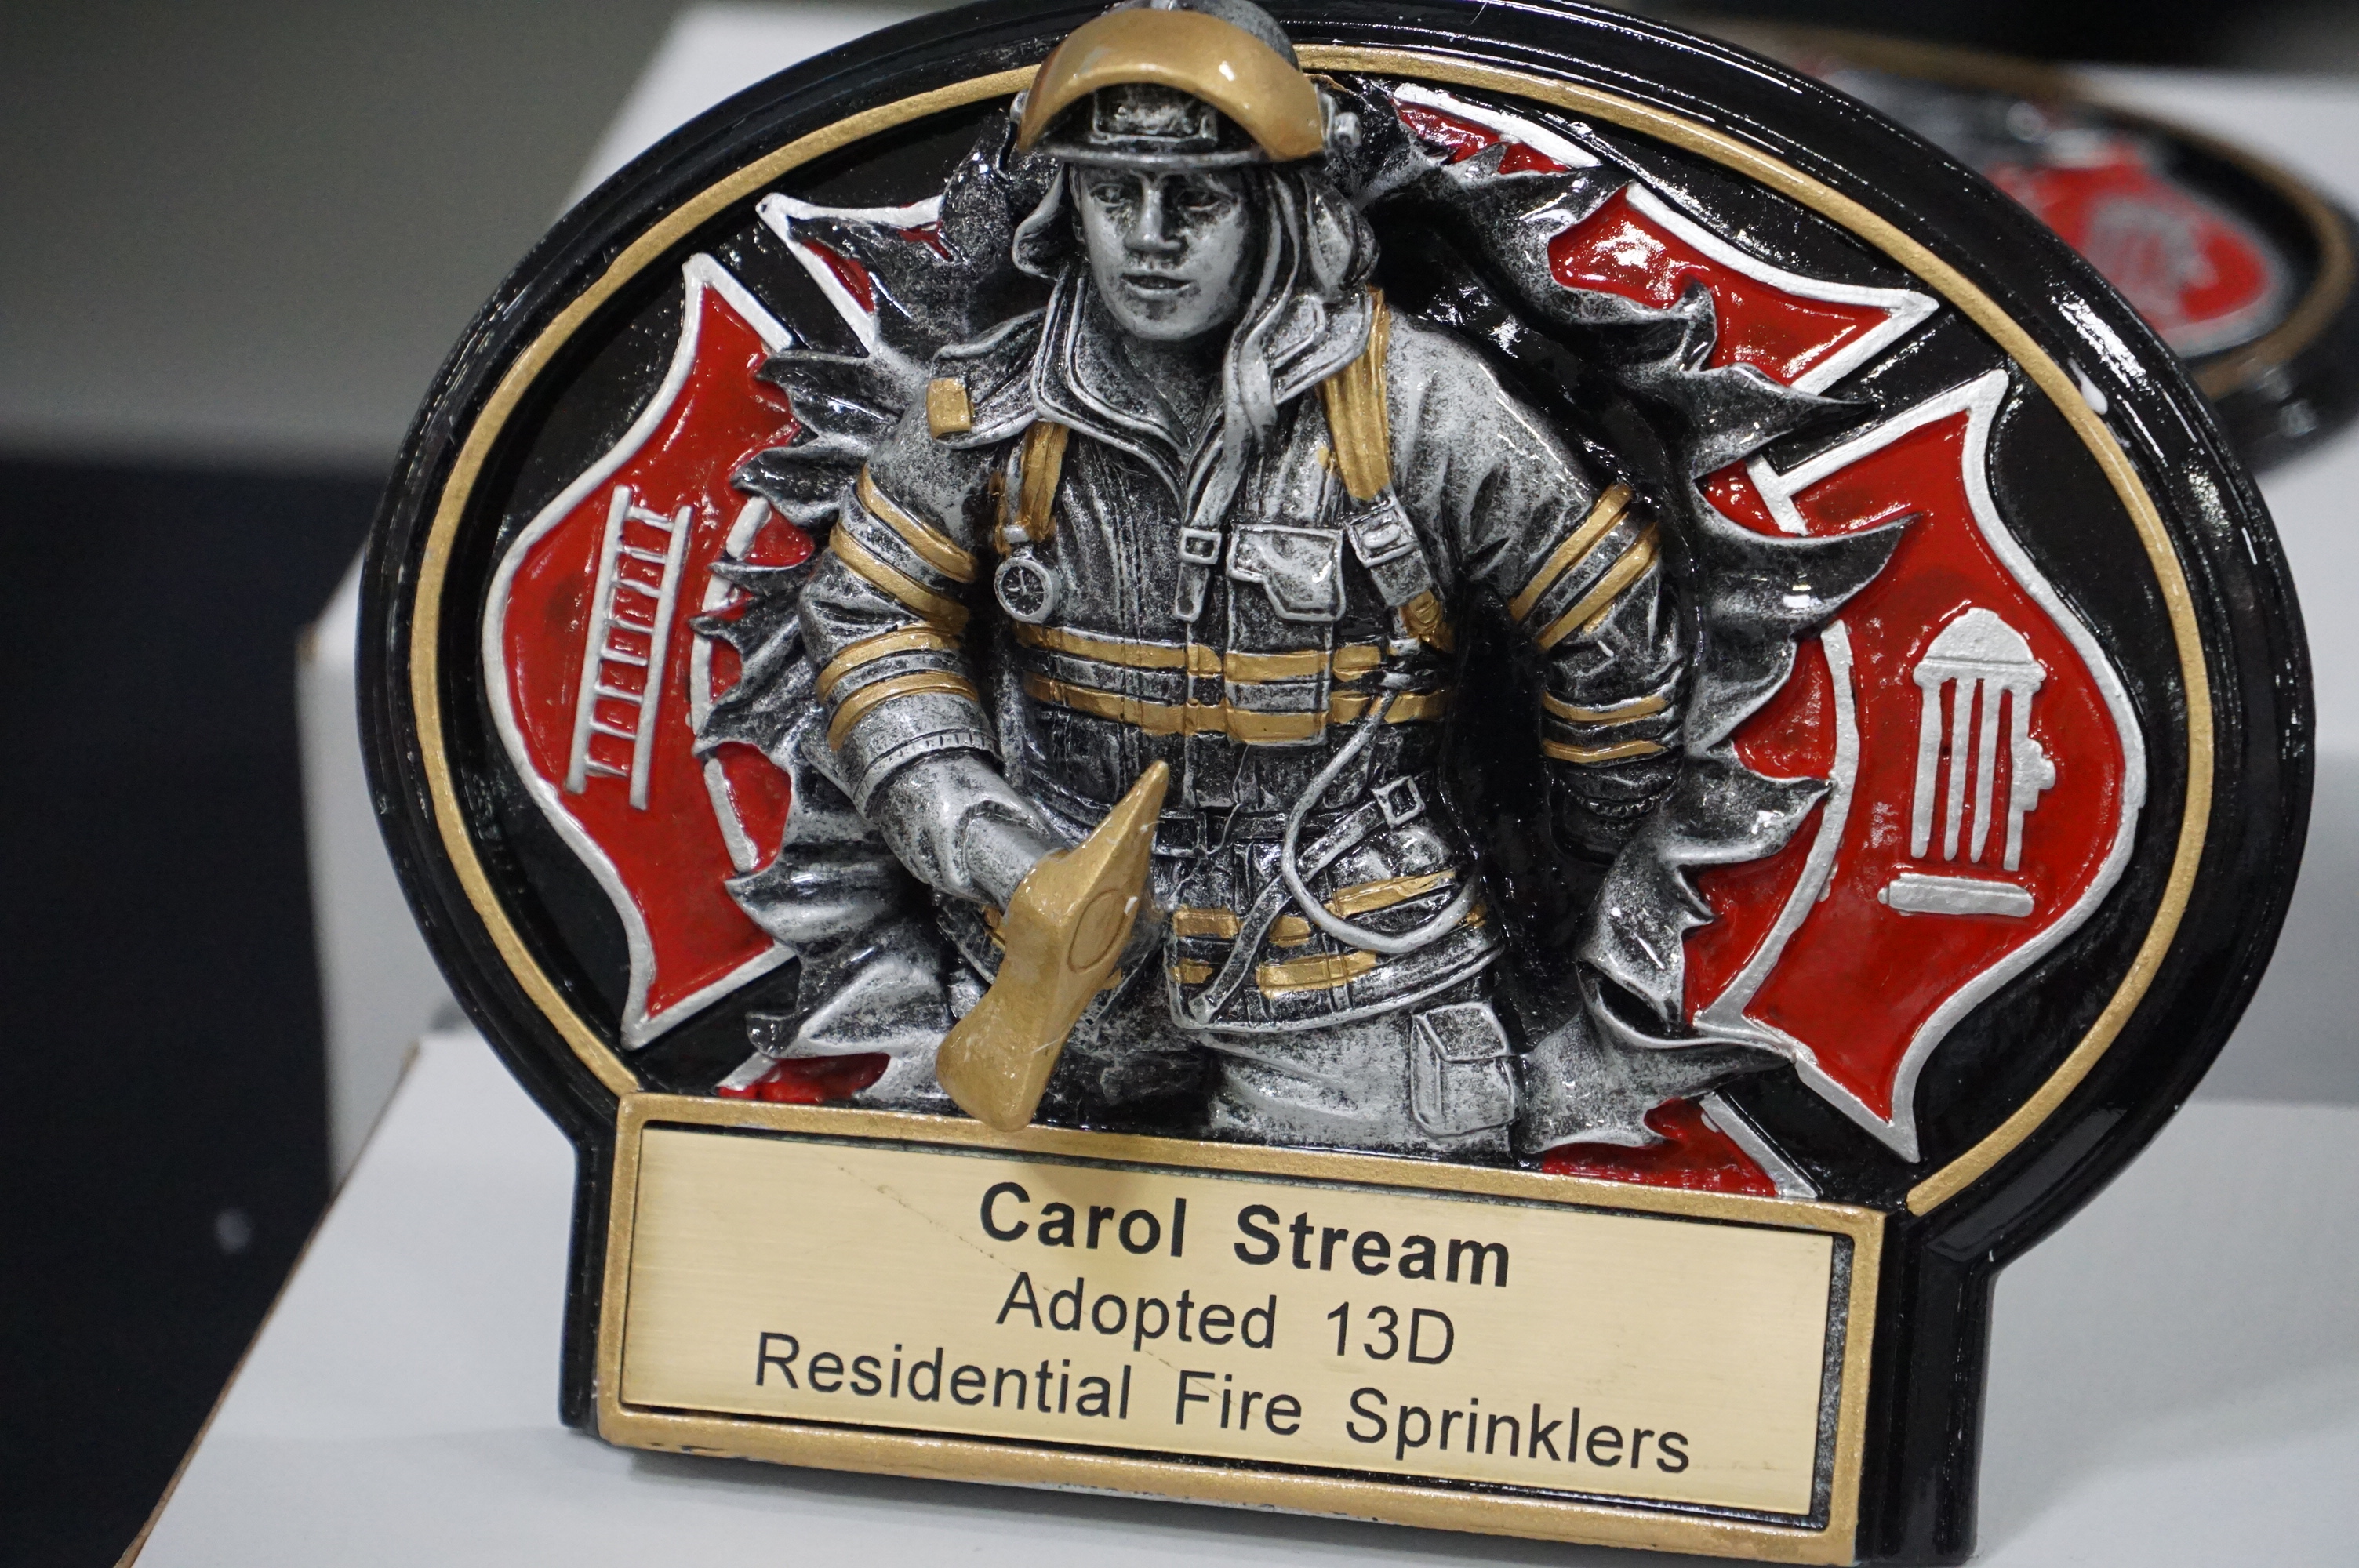 Adopted 13D Residential Fire Sprinkler Award for the town of Carol Stream.